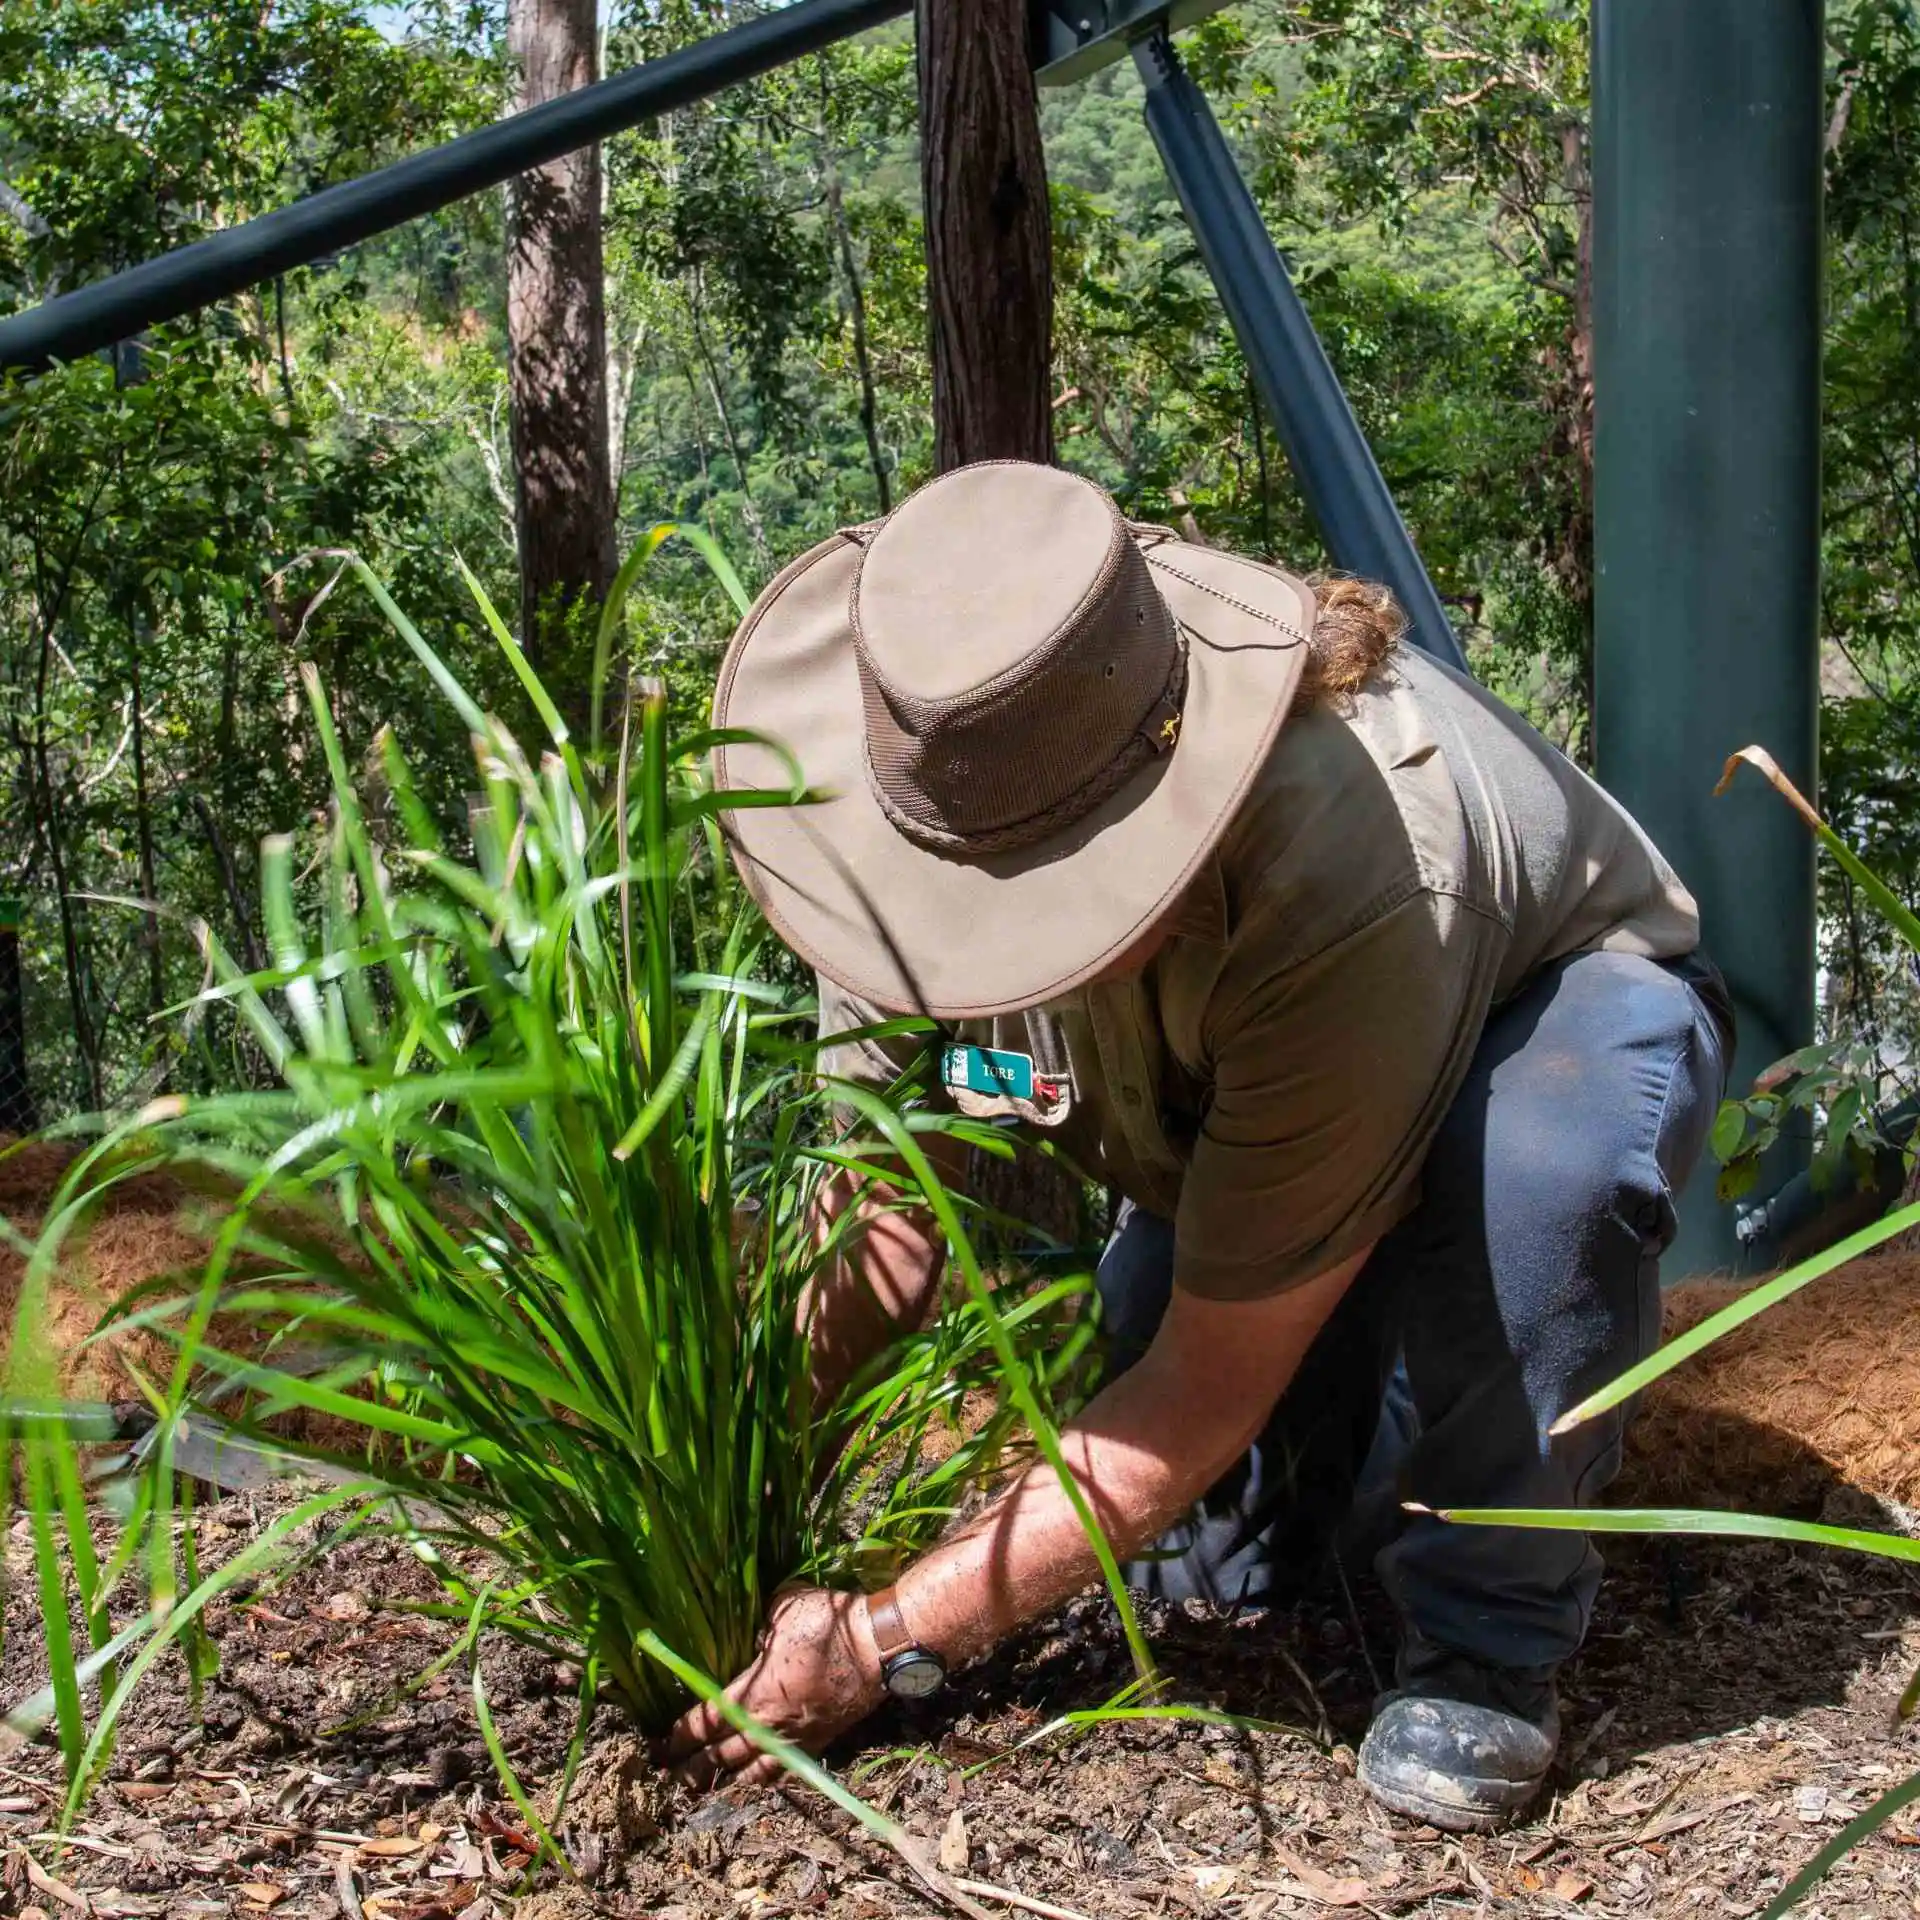 A ranger kneels on the ground planting a small shrub to revegetate the rainforest